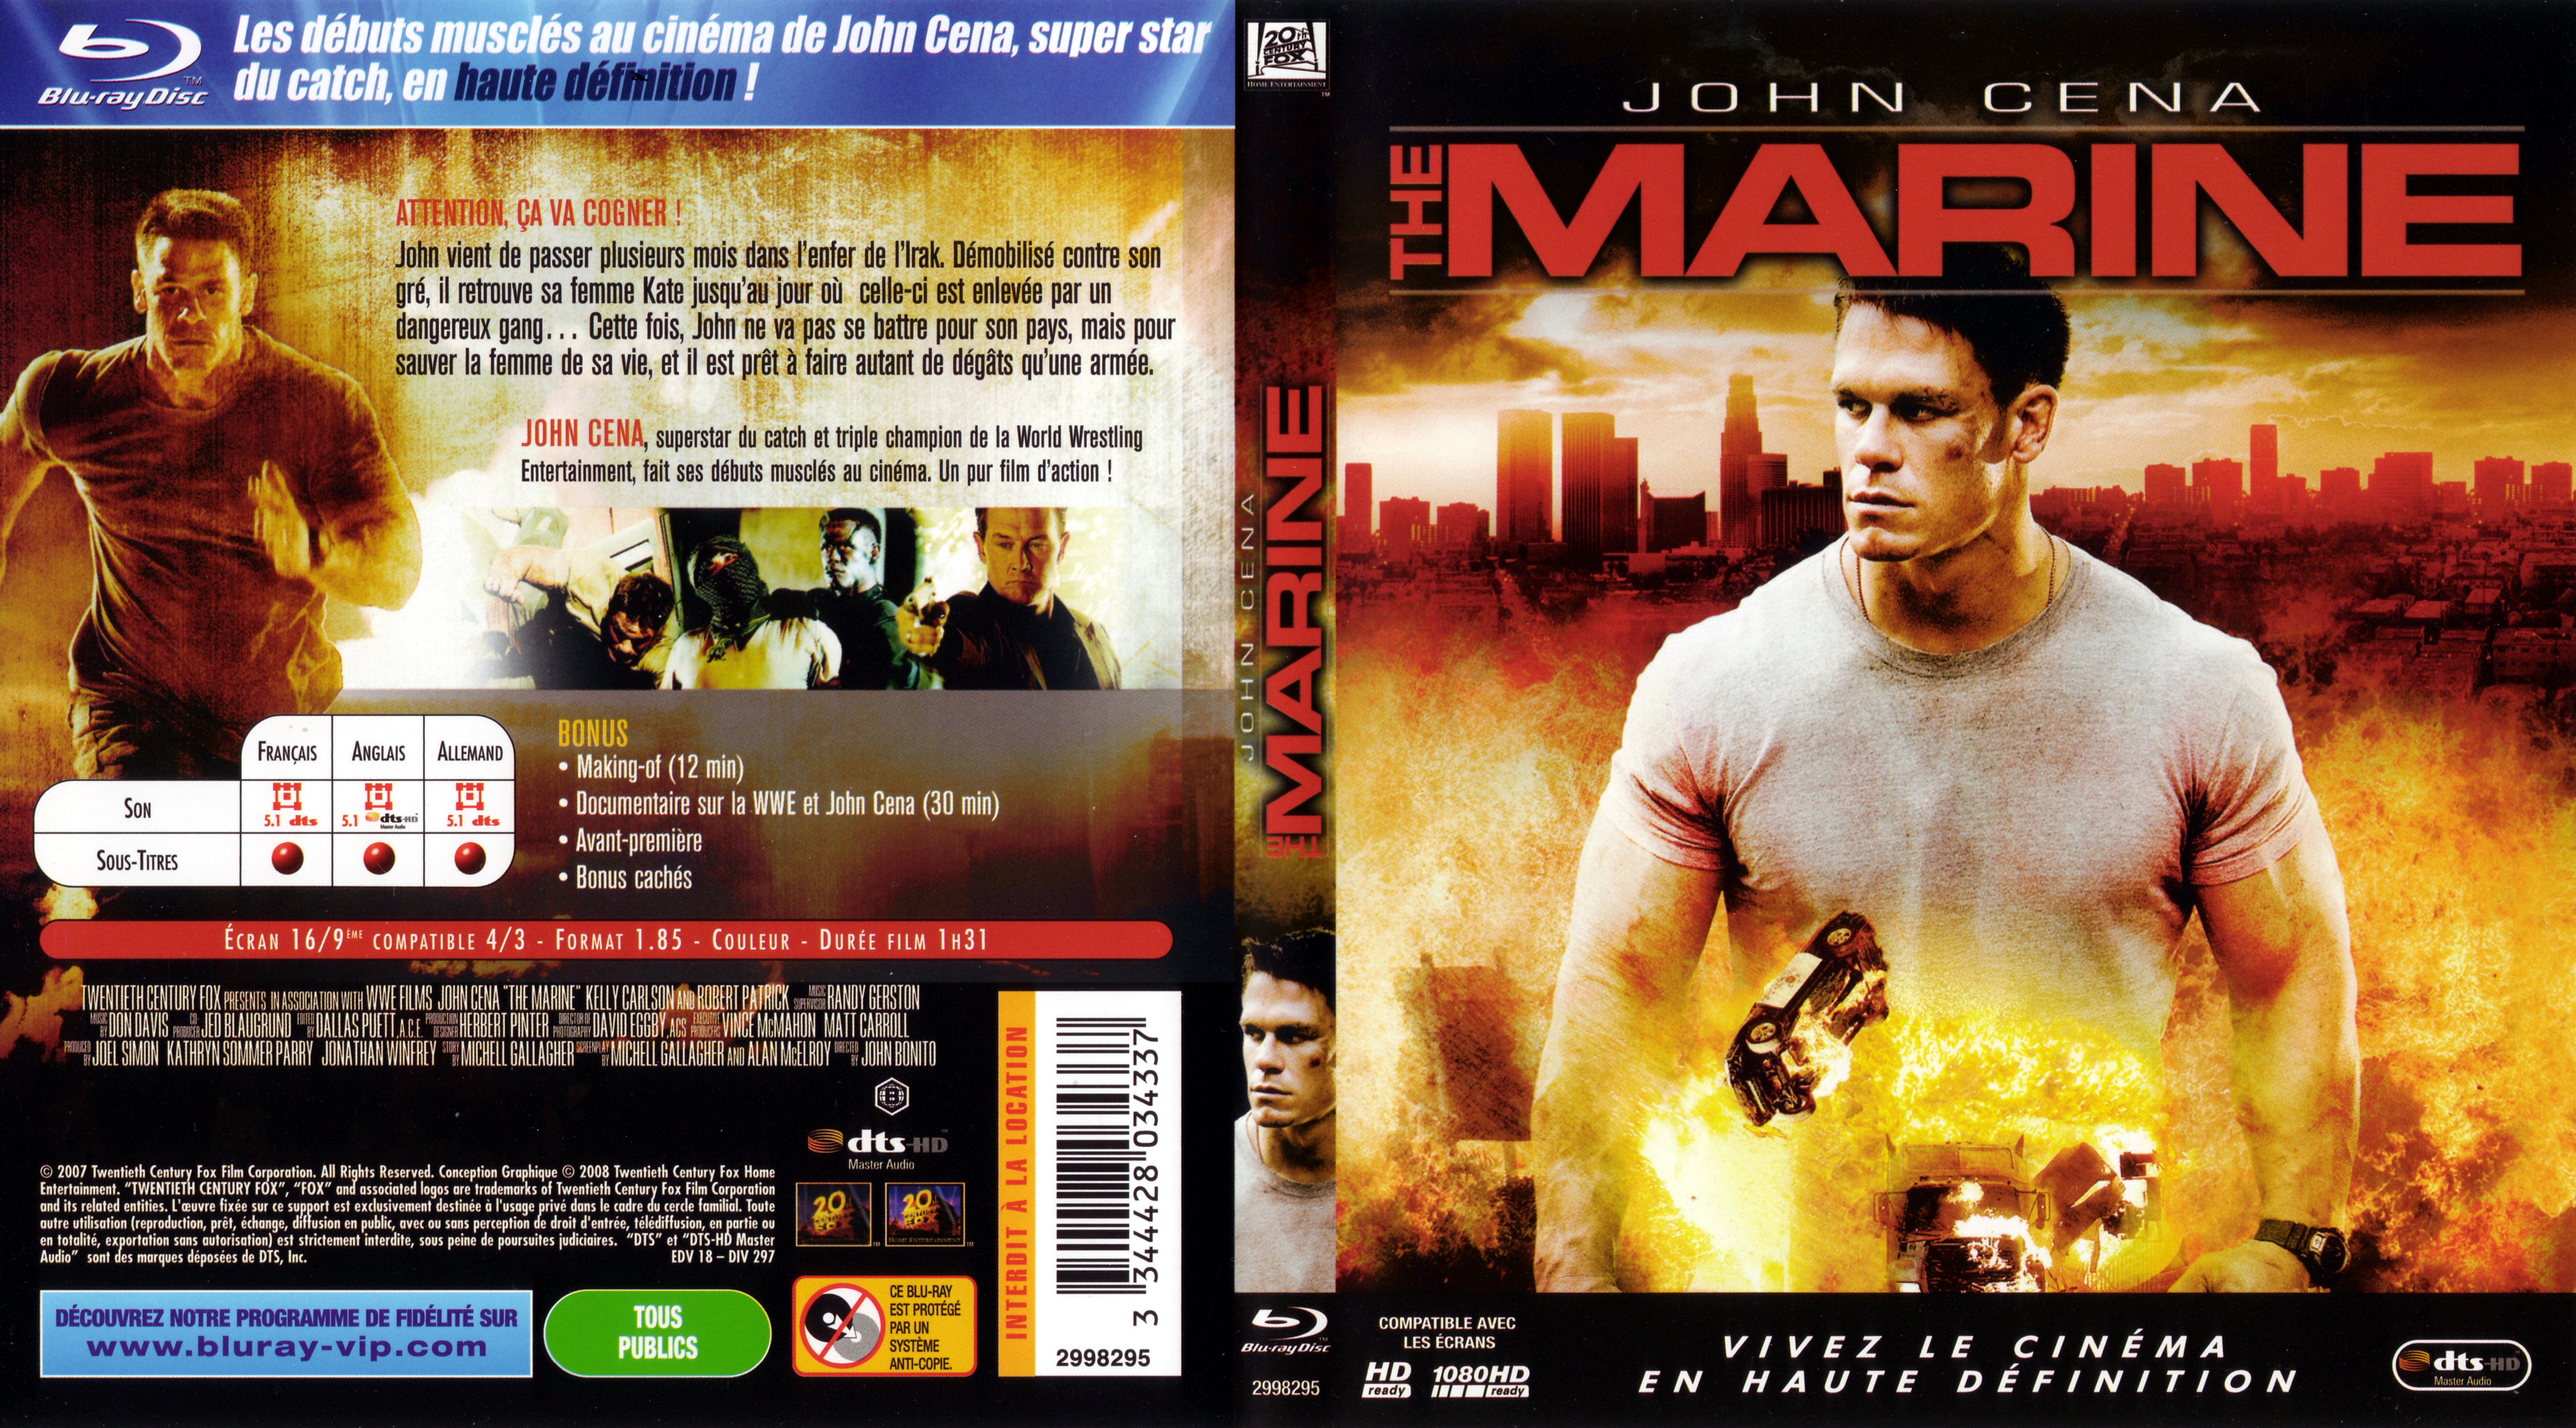 Jaquette DVD The marine (BLU-RAY) v2